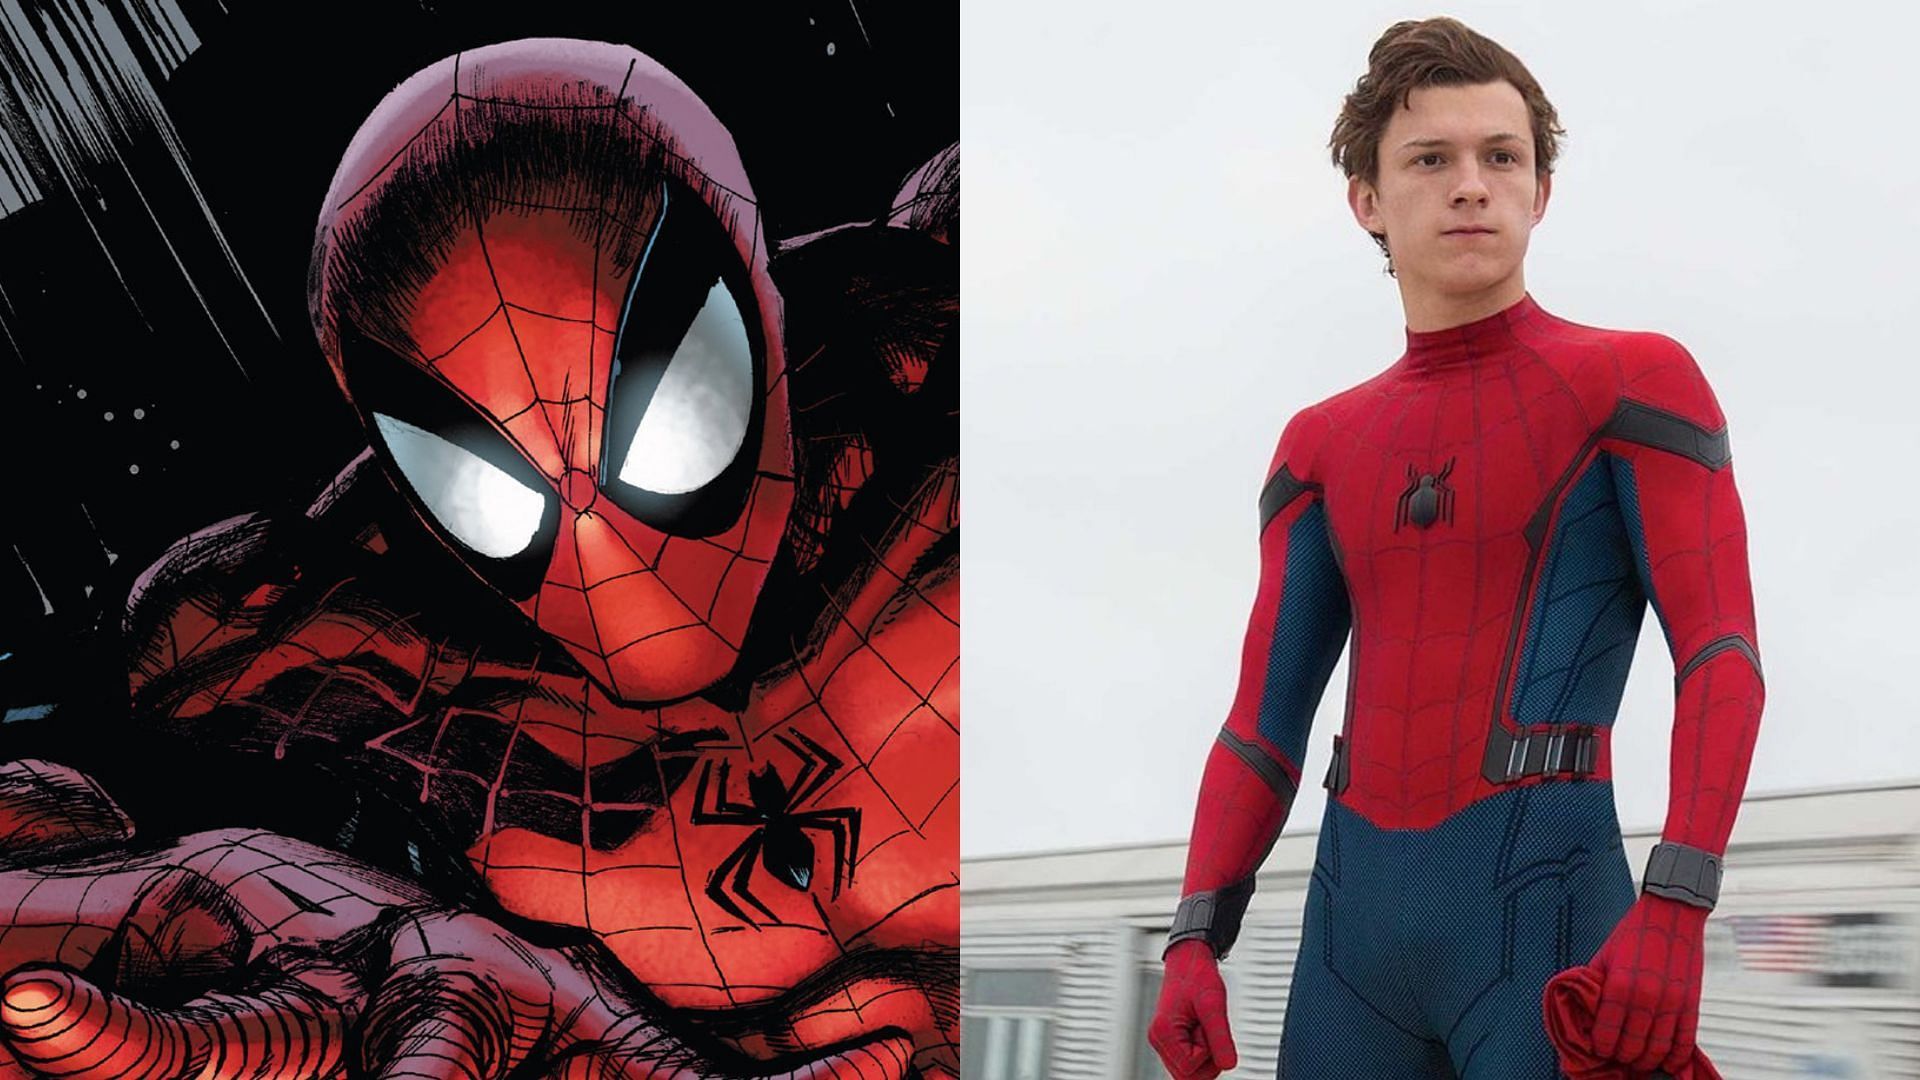 Left: Spider-Man in comics, Right: Spider-Man played by Tom Holland in the MCU (Images via Marvel/Sony Pictures)